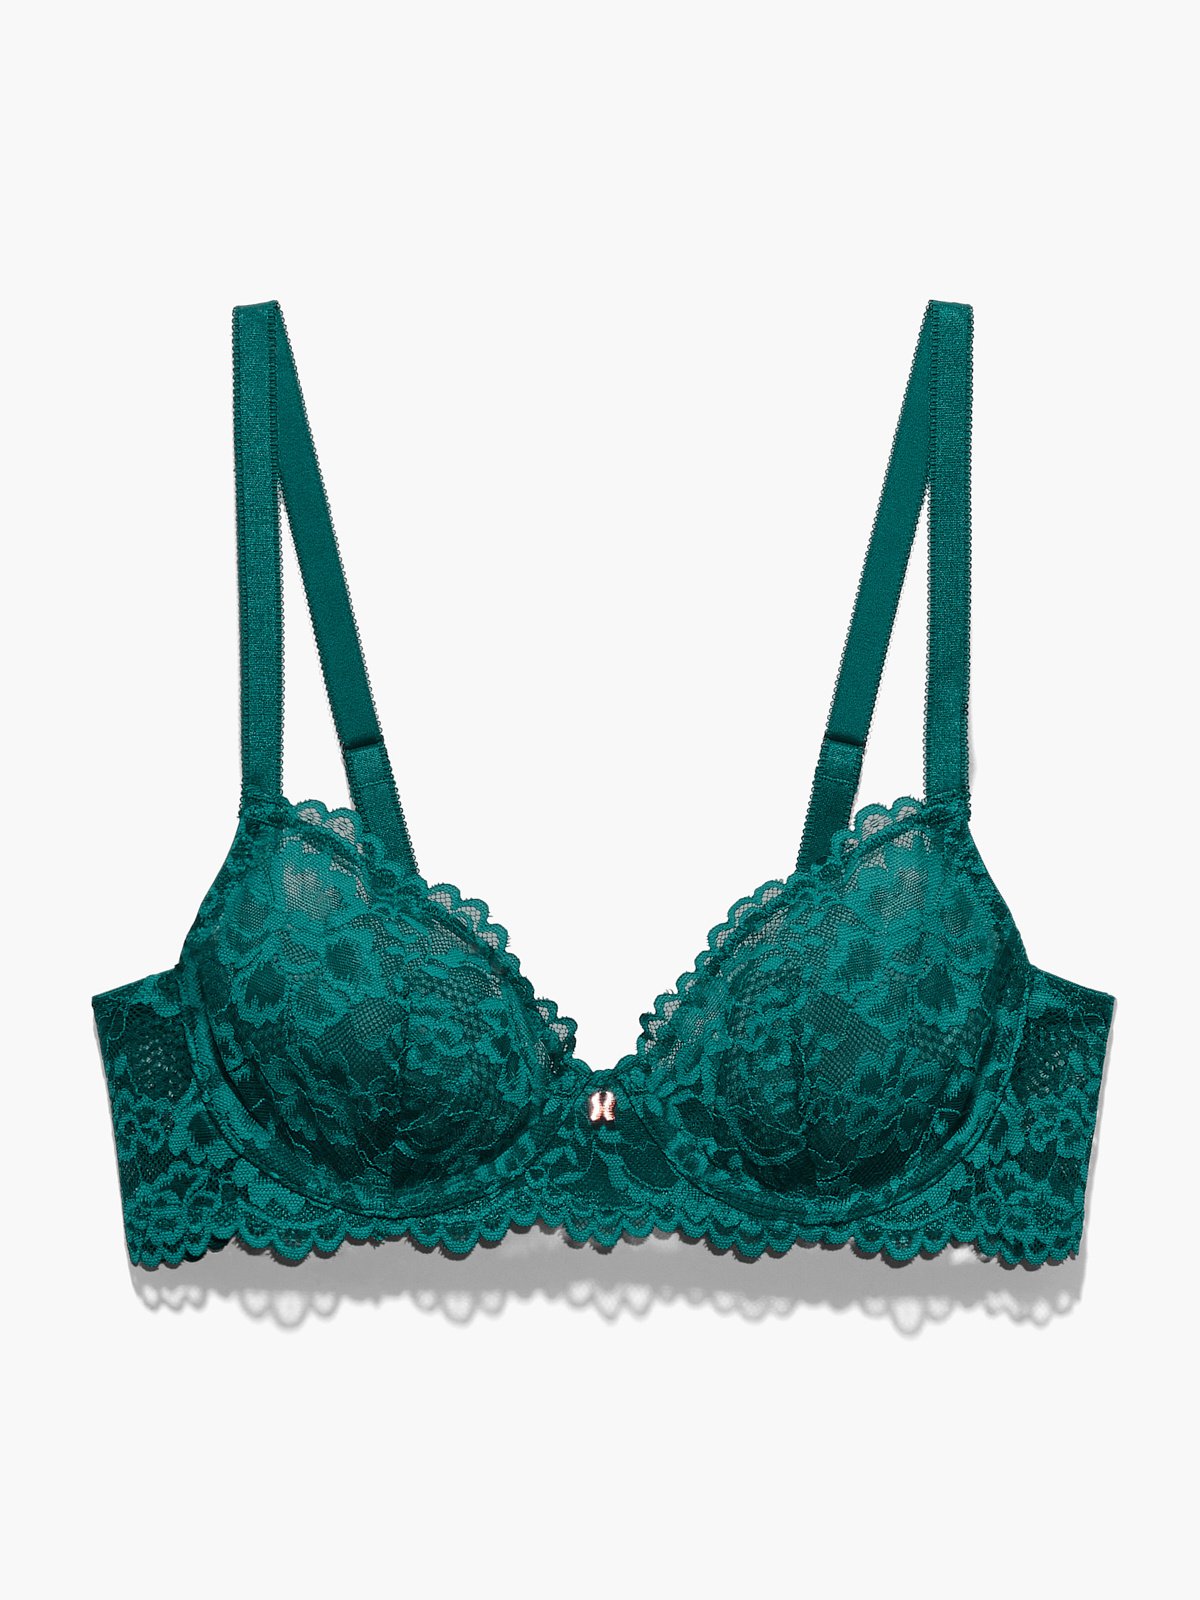 Buy GC GLORIOUS CHOICE Unlined Floral Lace Bra Panty Lingerie Set for  Women's (Small, Green) at